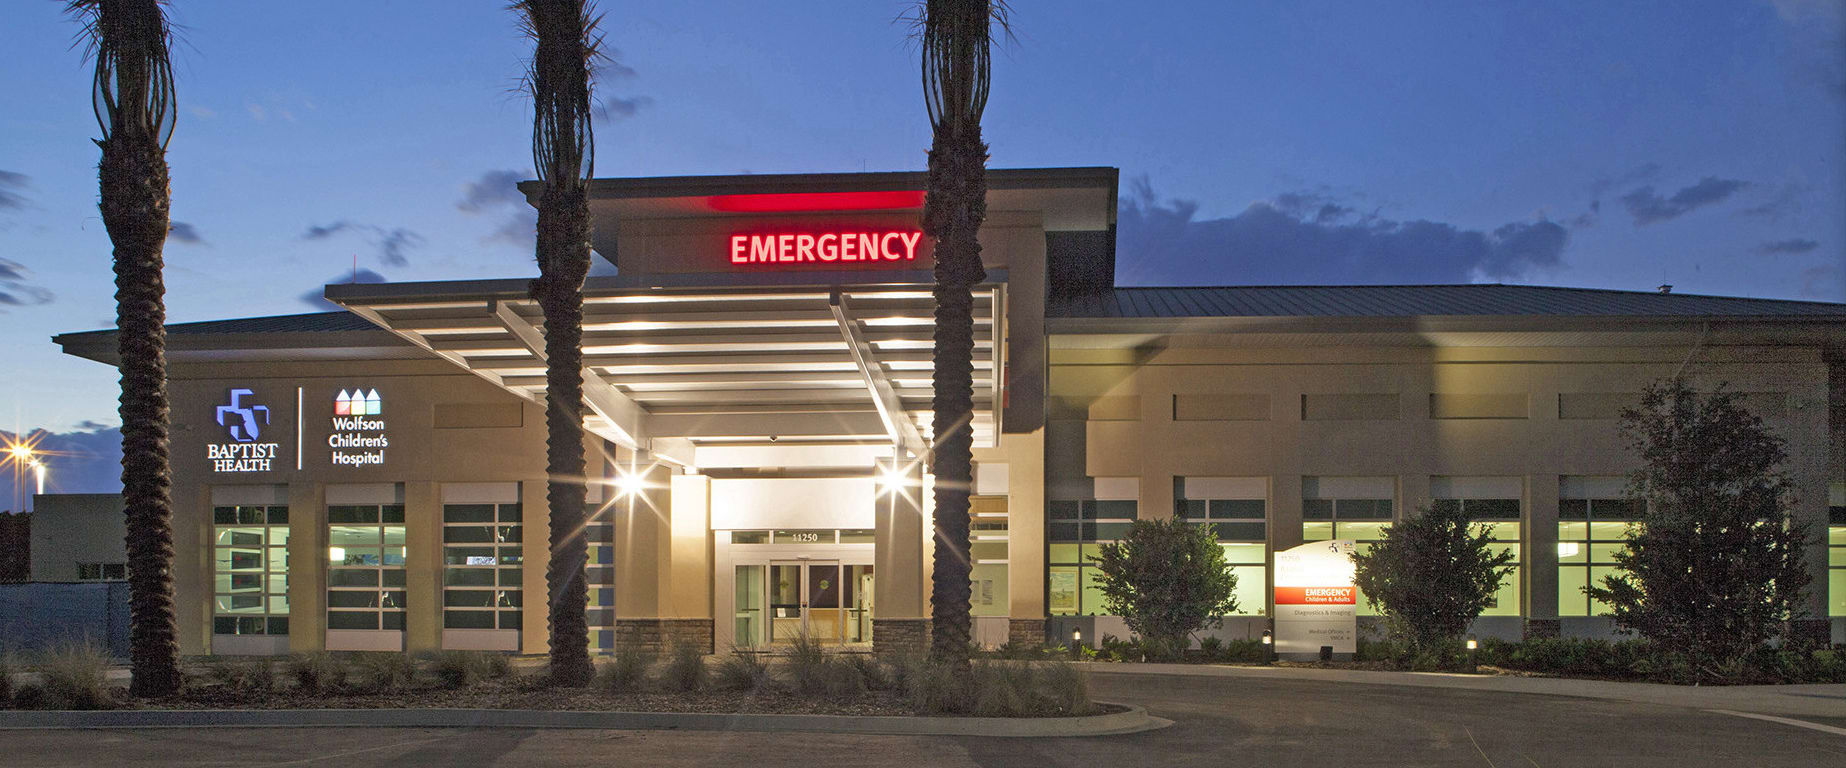 Exterior of the Baptist and Wolfson North emergency room at nightti